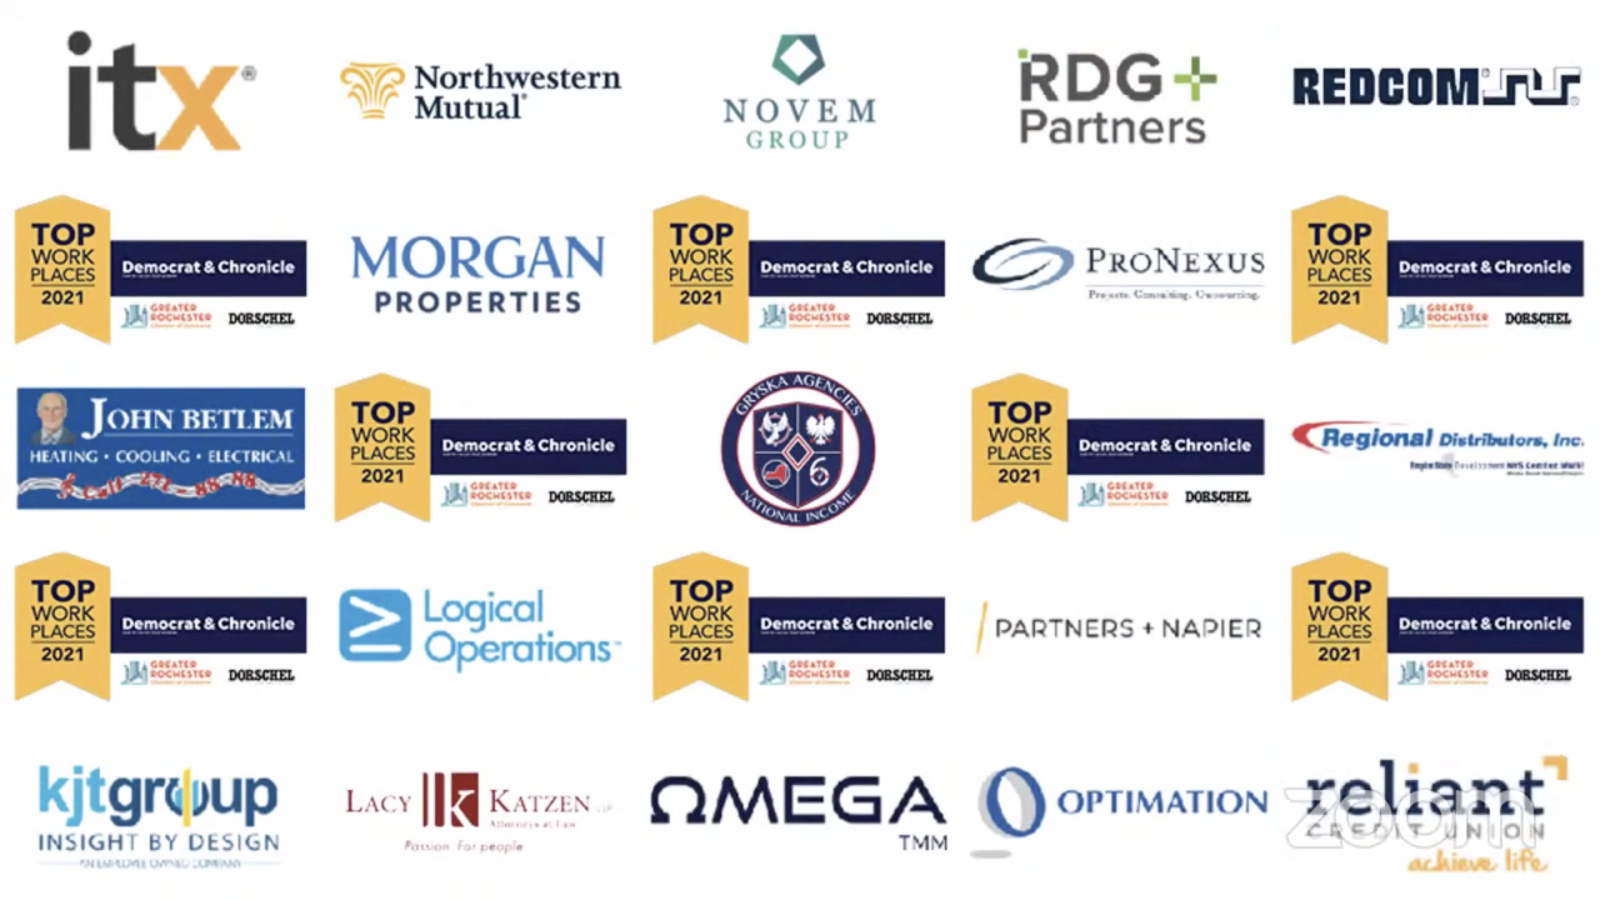 Rochester D&C Top Workplaces - Omega TMM